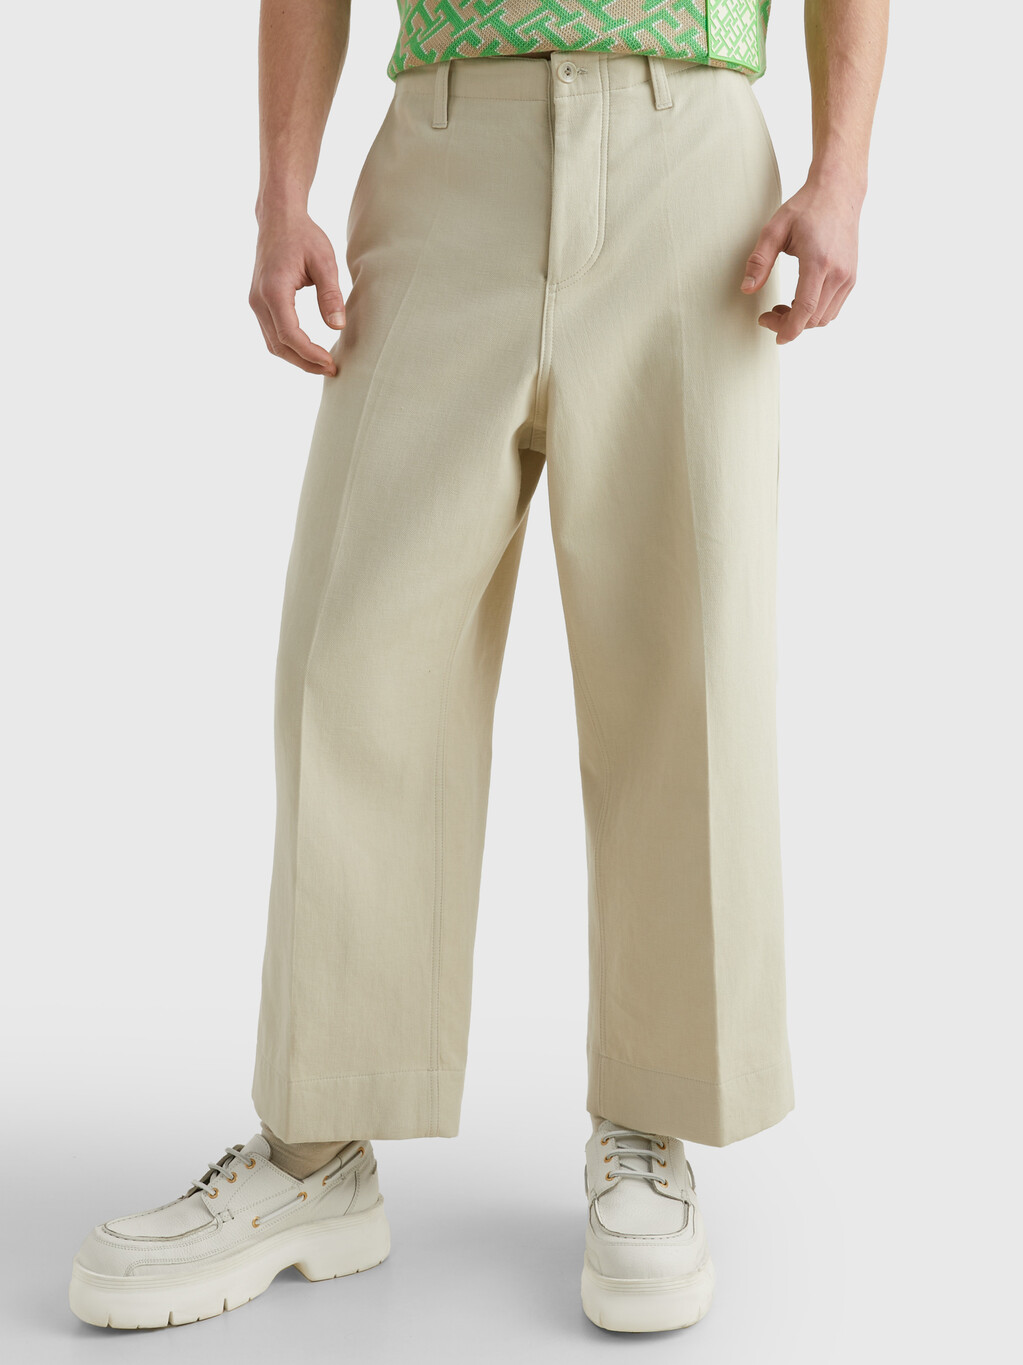 Crest Relaxed Fit Chinos, Light Sandalwood, hi-res